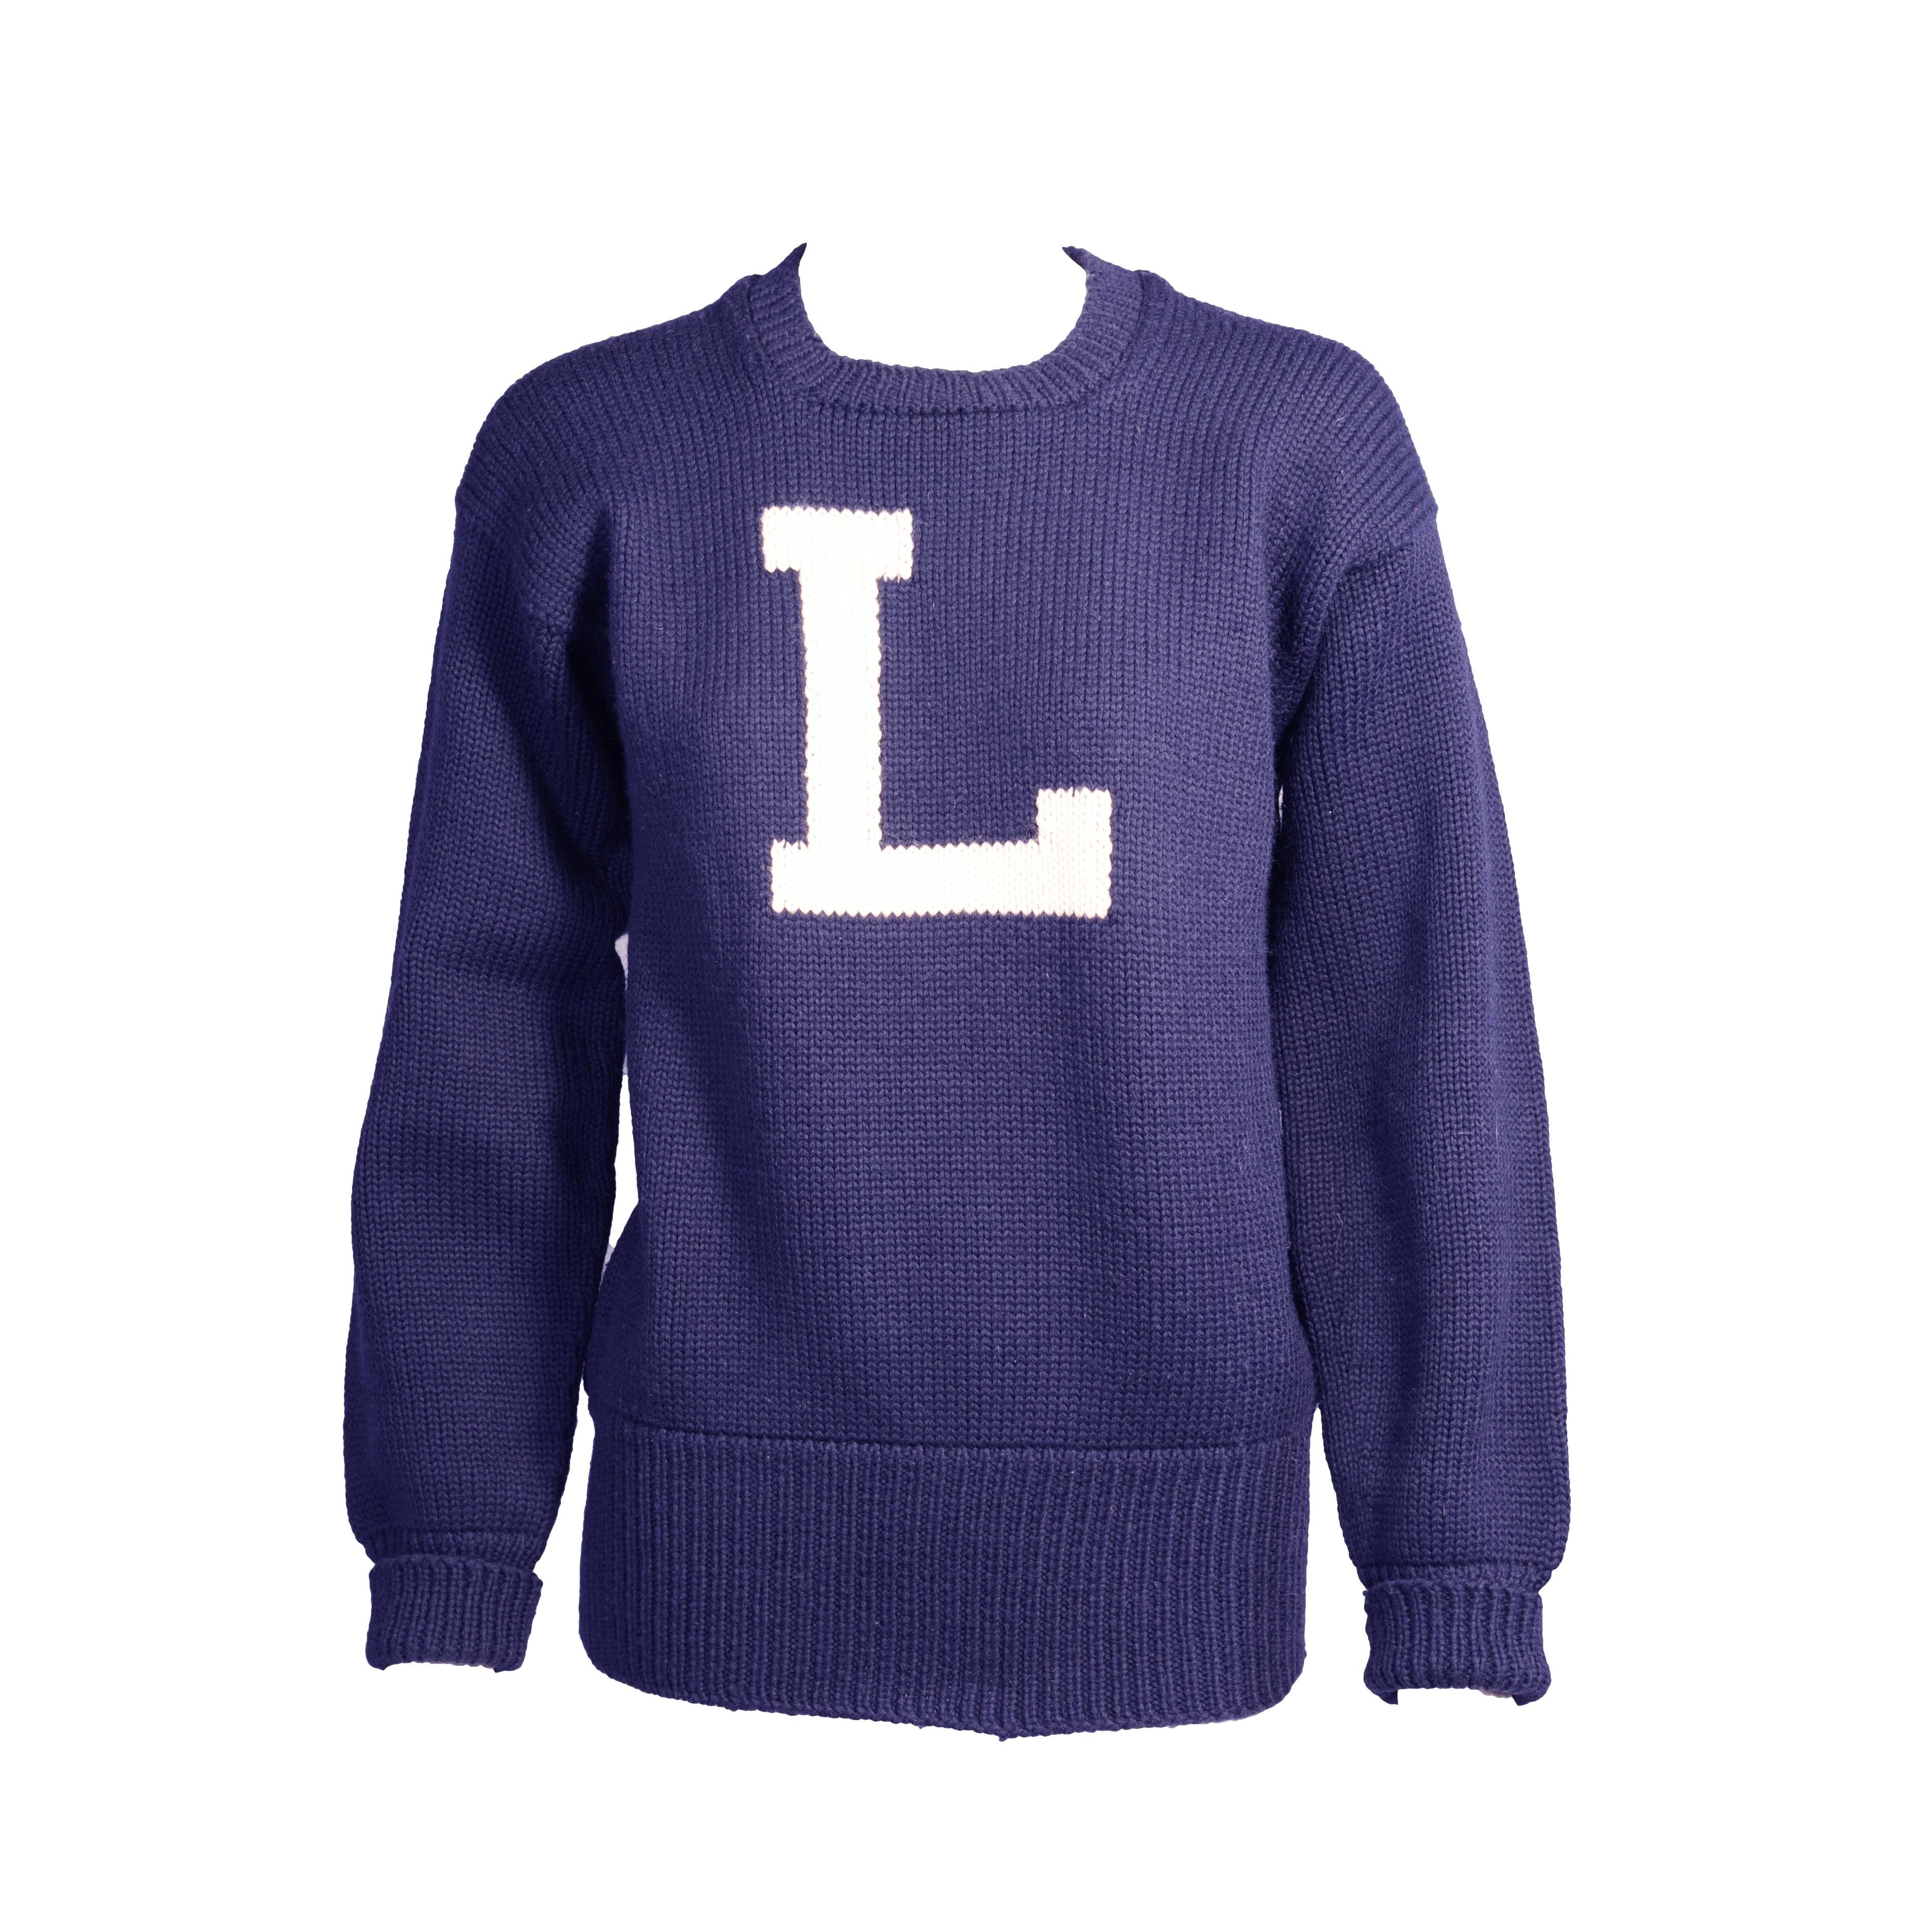 Vintage Navy & White Letter Sweater For Sale